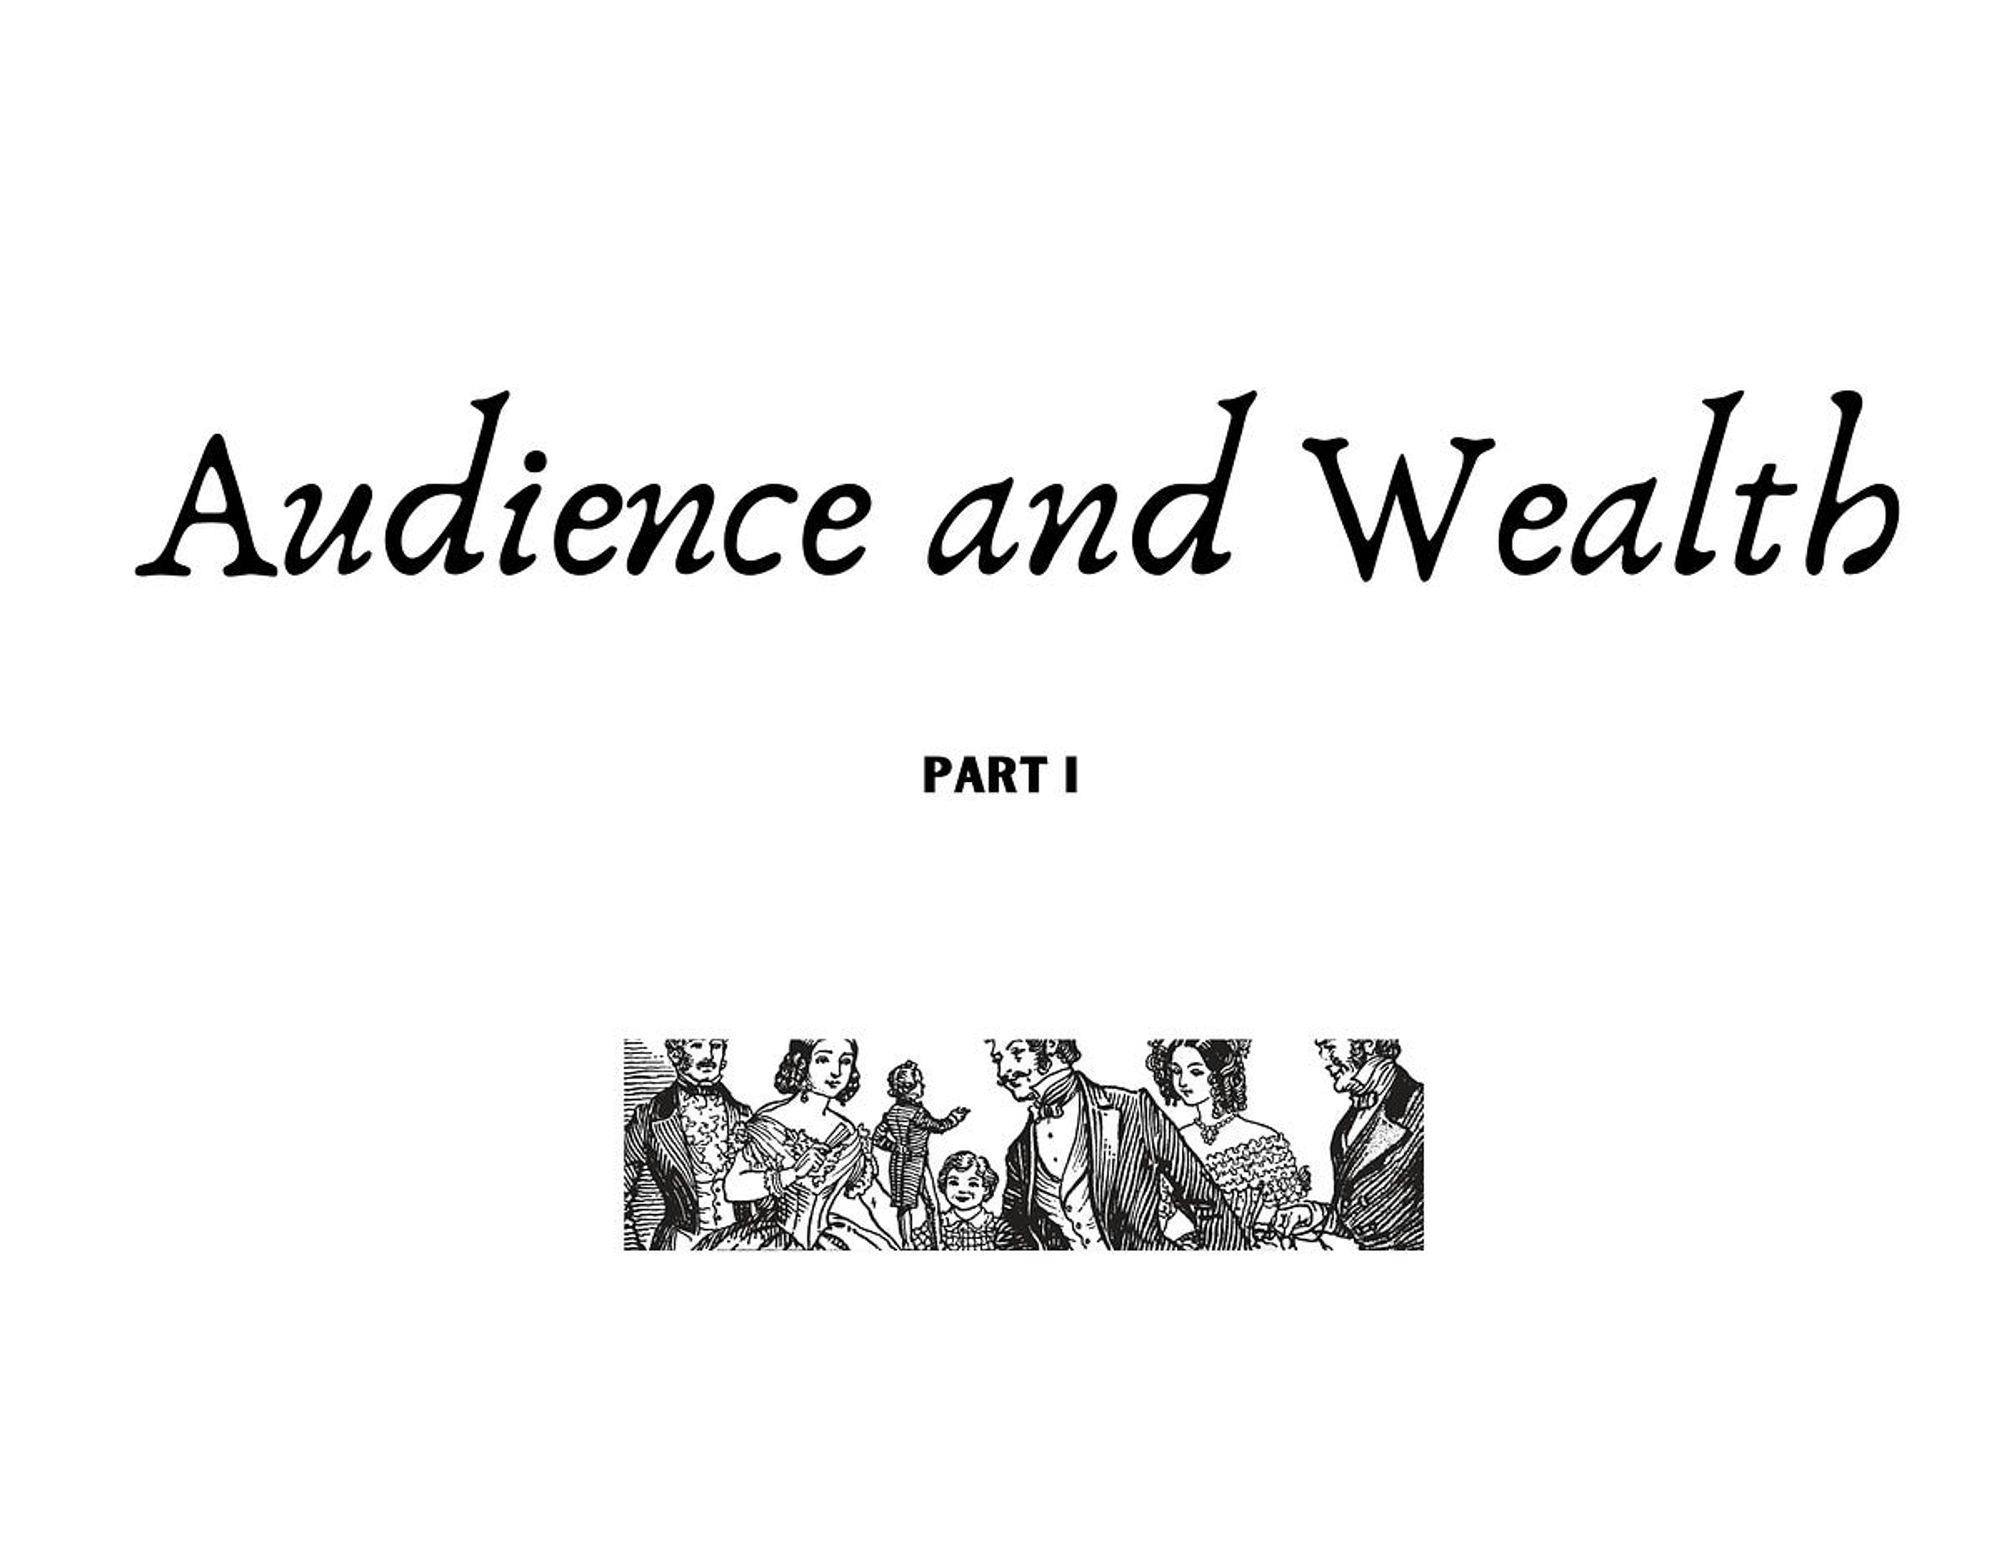 Audience and Wealth, Part I